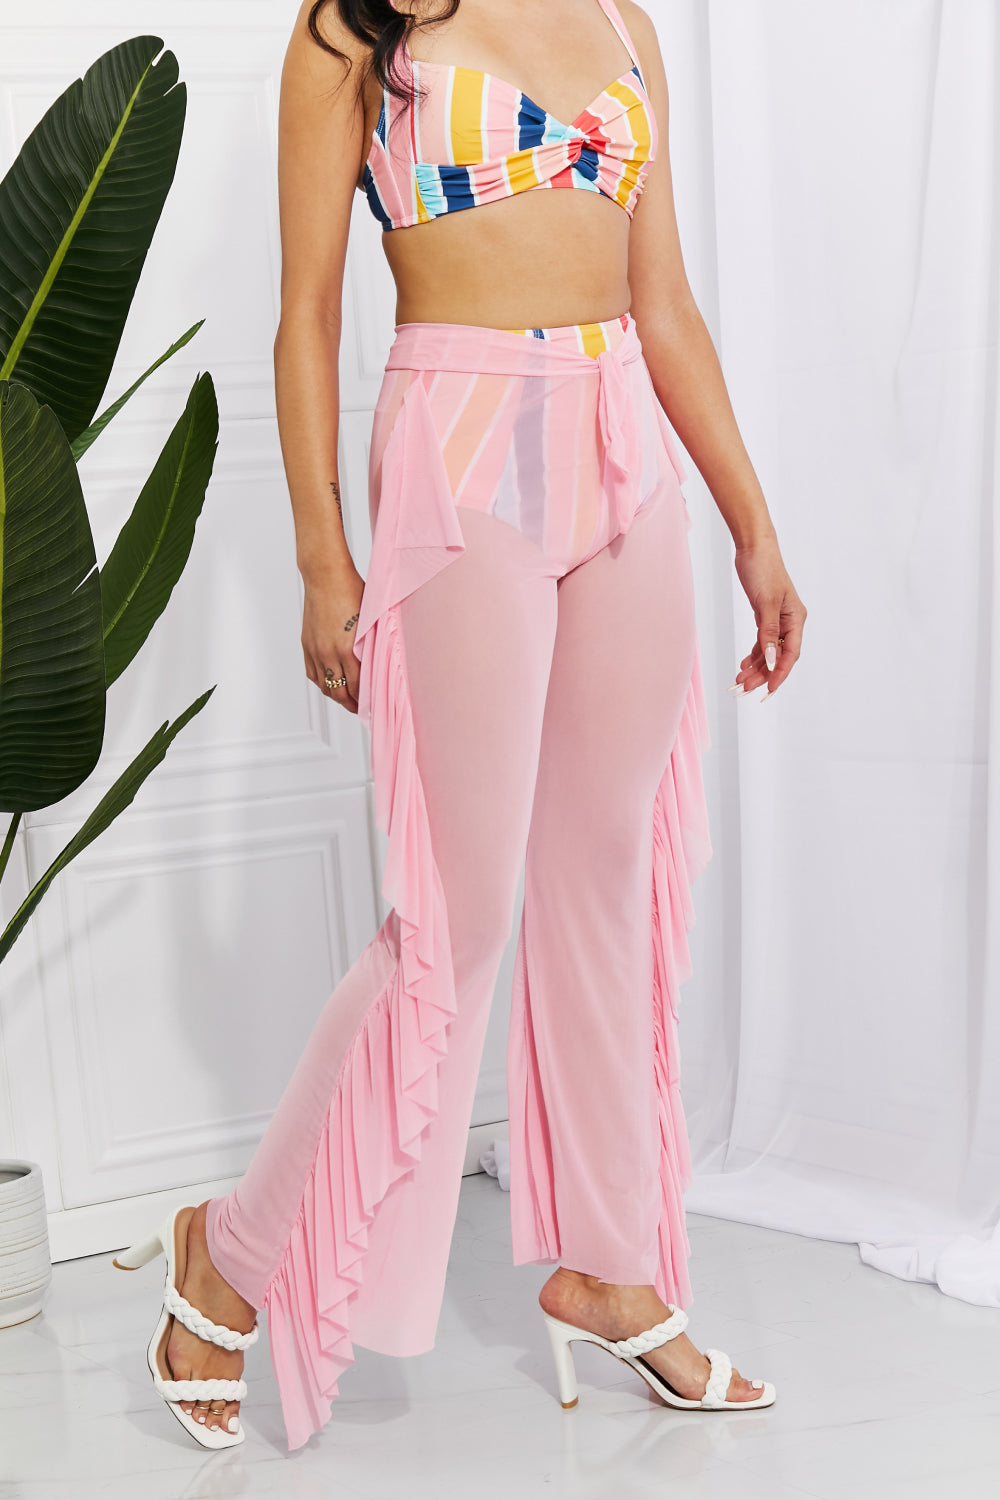 Marina West Swim Take Me To The Beach Mesh Ruffle Cover-Up Pants Print on any thing USA/STOD clothes